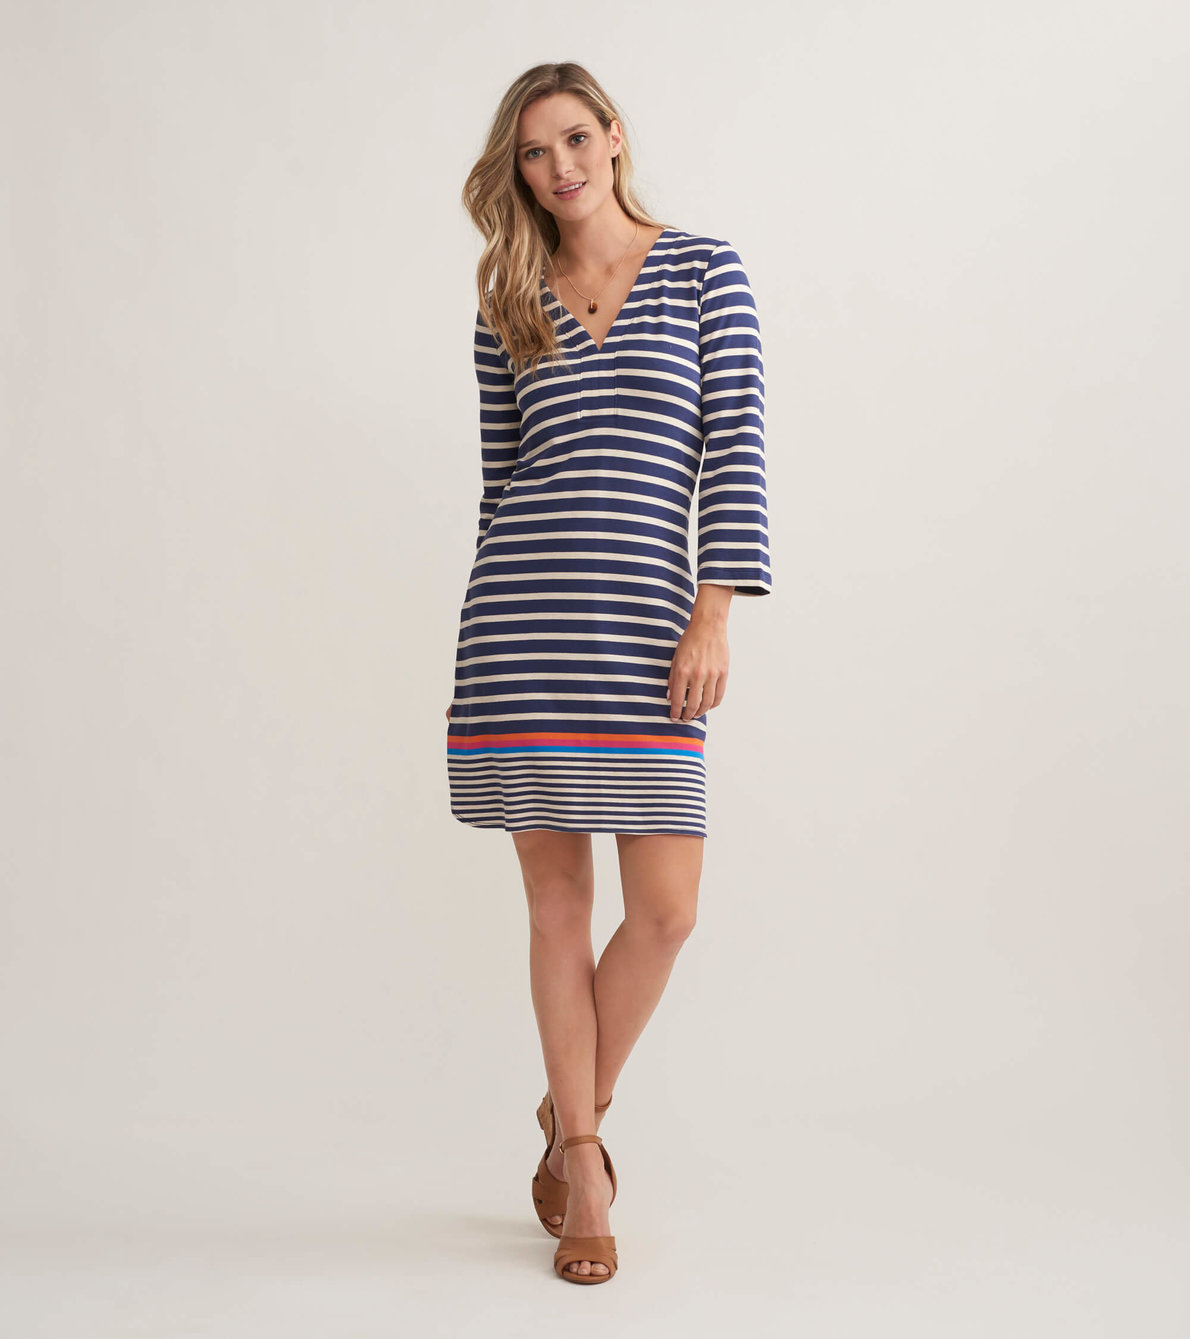 View larger image of Ashley Dress - Navy Stripes